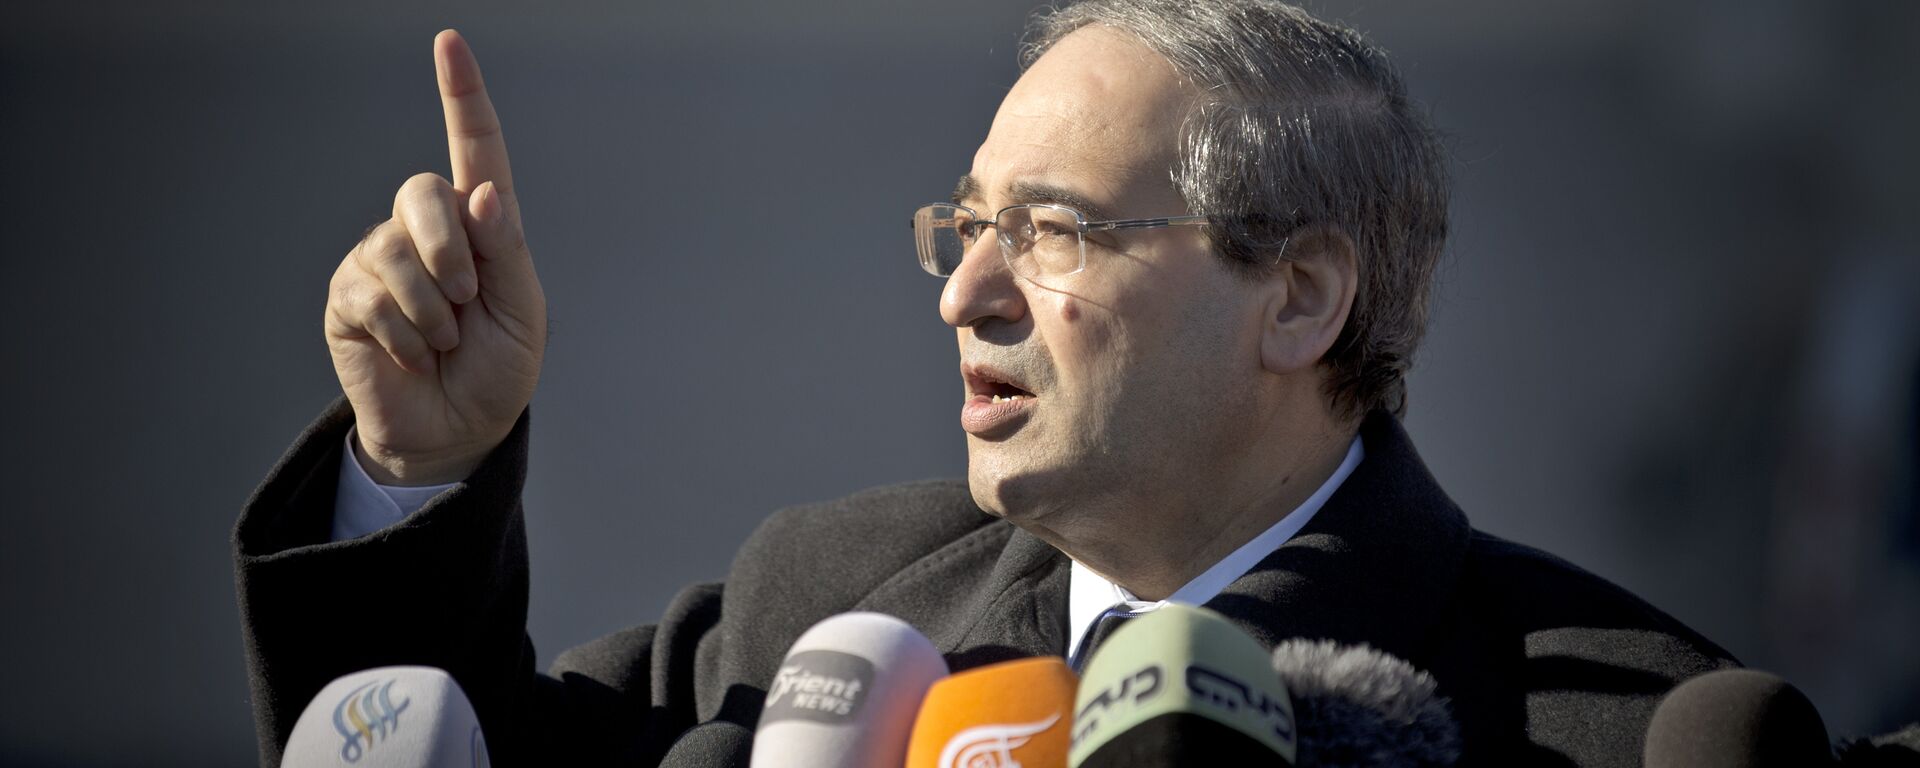 Syrian Deputy Foreign Minister Faisal Mekdad gestures as he talks to journalists after a meeting with the Syrian opposition at the United Nations headquarters in Geneva, Switzerland (File) - Sputnik International, 1920, 23.09.2022